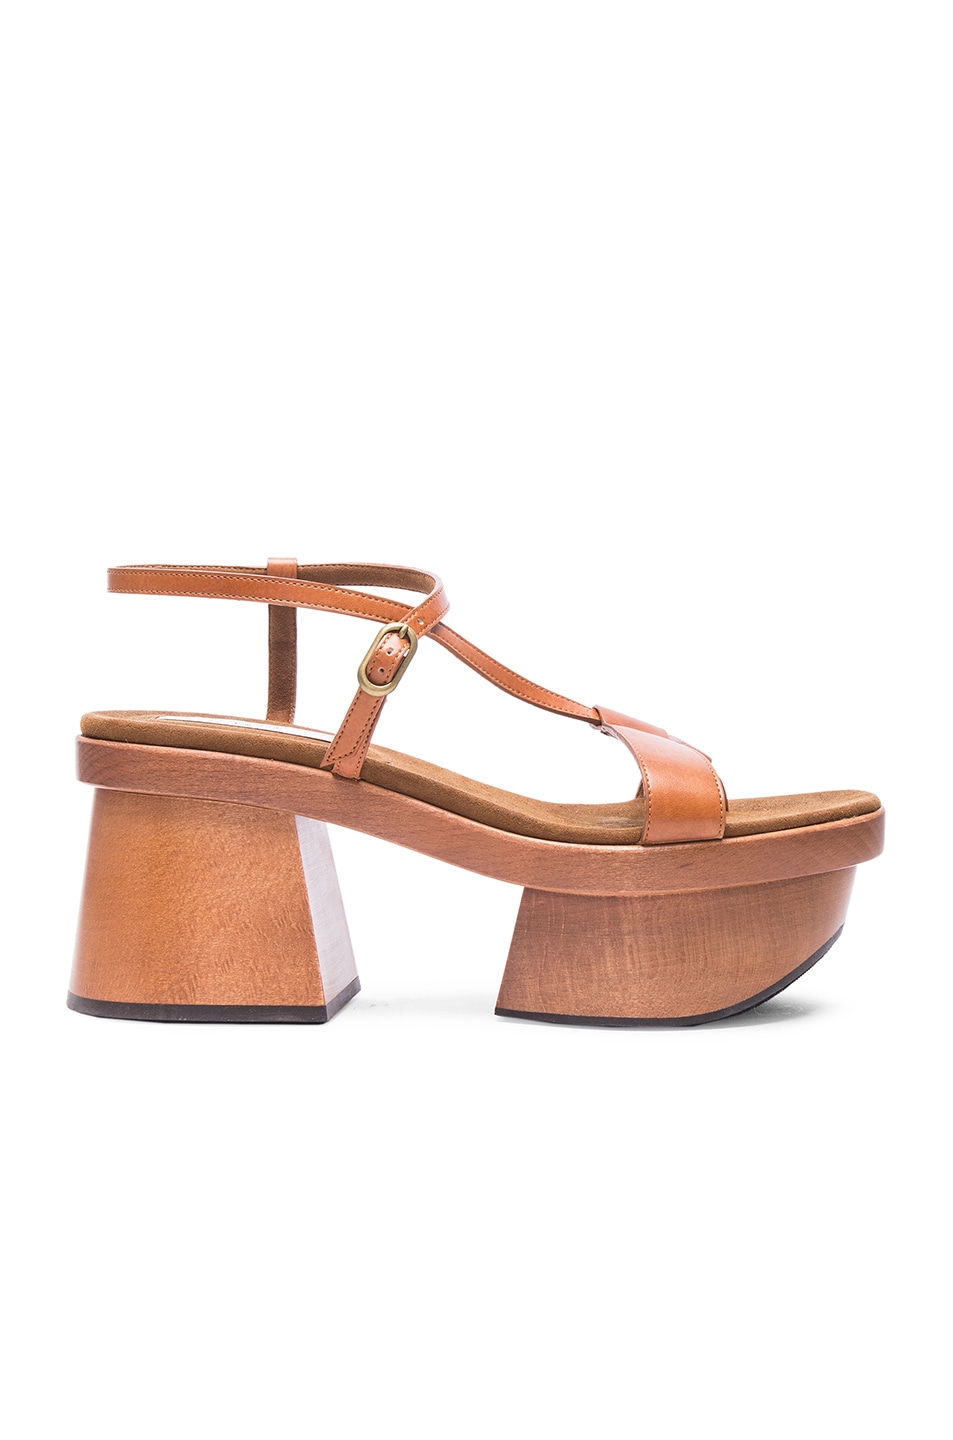 Image 1 of Stella McCartney Altea Sandals in Canyon